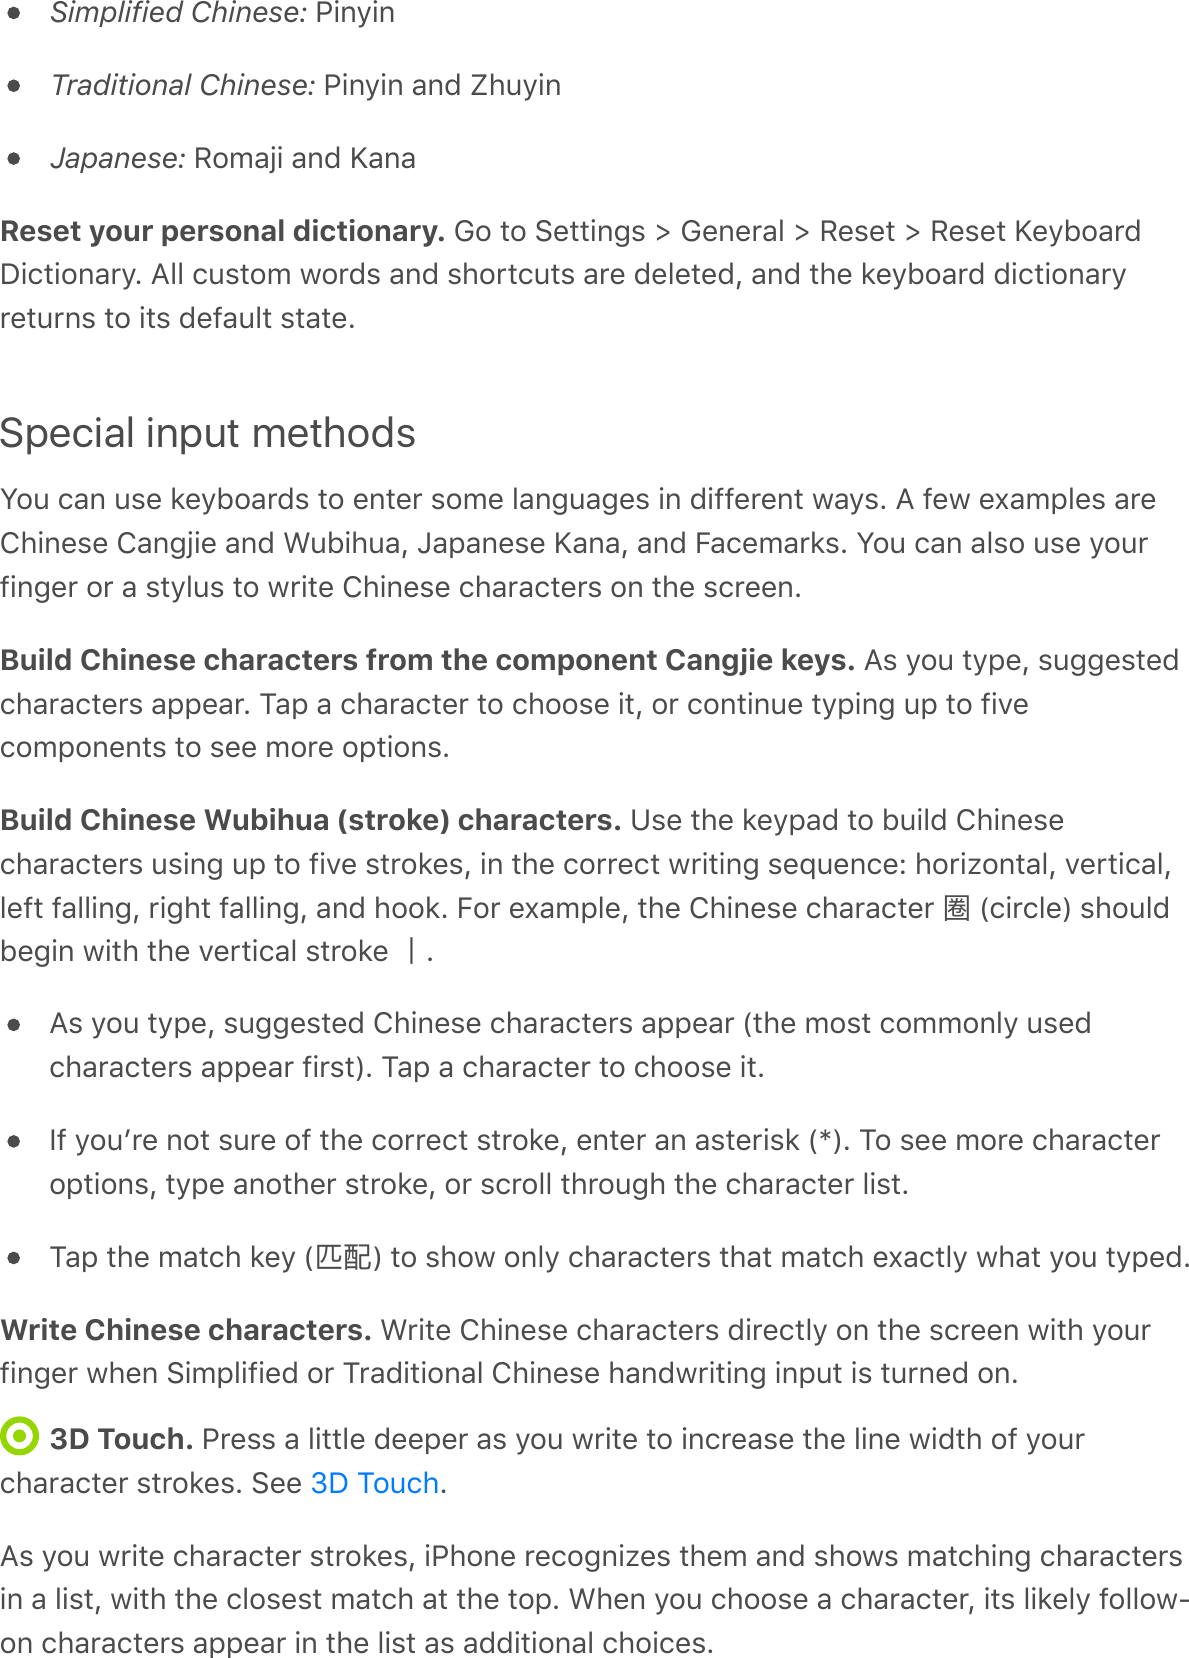 Simplified Chinese: PinyinTraditional Chinese: Pinyin and ZhuyinJapanese: Romaji and KanaReset your personal dictionary. Go to Settings &gt; General &gt; Reset &gt; Reset KeyboardDictionary. All custom words and shortcuts are deleted, and the keyboard dictionaryreturns to its default state.Special input methodsYou can use keyboards to enter some languages in different ways. A few examples areChinese Cangjie and Wubihua, Japanese Kana, and Facemarks. You can also use yourfinger or a stylus to write Chinese characters on the screen.Build Chinese characters from the component Cangjie keys. As you type, suggestedcharacters appear. Tap a character to choose it, or continue typing up to fivecomponents to see more options.Build Chinese Wubihua (stroke) characters. Use the keypad to build Chinesecharacters using up to five strokes, in the correct writing sequence: horizontal, vertical,left falling, right falling, and hook. For example, the Chinese character 圈 (circle) shouldbegin with the vertical stroke .As you type, suggested Chinese characters appear (the most commonly usedcharacters appear first). Tap a character to choose it.If youʼre not sure of the correct stroke, enter an asterisk (*). To see more characteroptions, type another stroke, or scroll through the character list.Tap the match key (匹配) to show only characters that match exactly what you typed.Write Chinese characters. Write Chinese characters directly on the screen with yourfinger when Simplified or Traditional Chinese handwriting input is turned on.3D Touch. Press a little deeper as you write to increase the line width of yourcharacter strokes. See  .As you write character strokes, iPhone recognizes them and shows matching charactersin a list, with the closest match at the top. When you choose a character, its likely follow-on characters appear in the list as additional choices.3D Touch